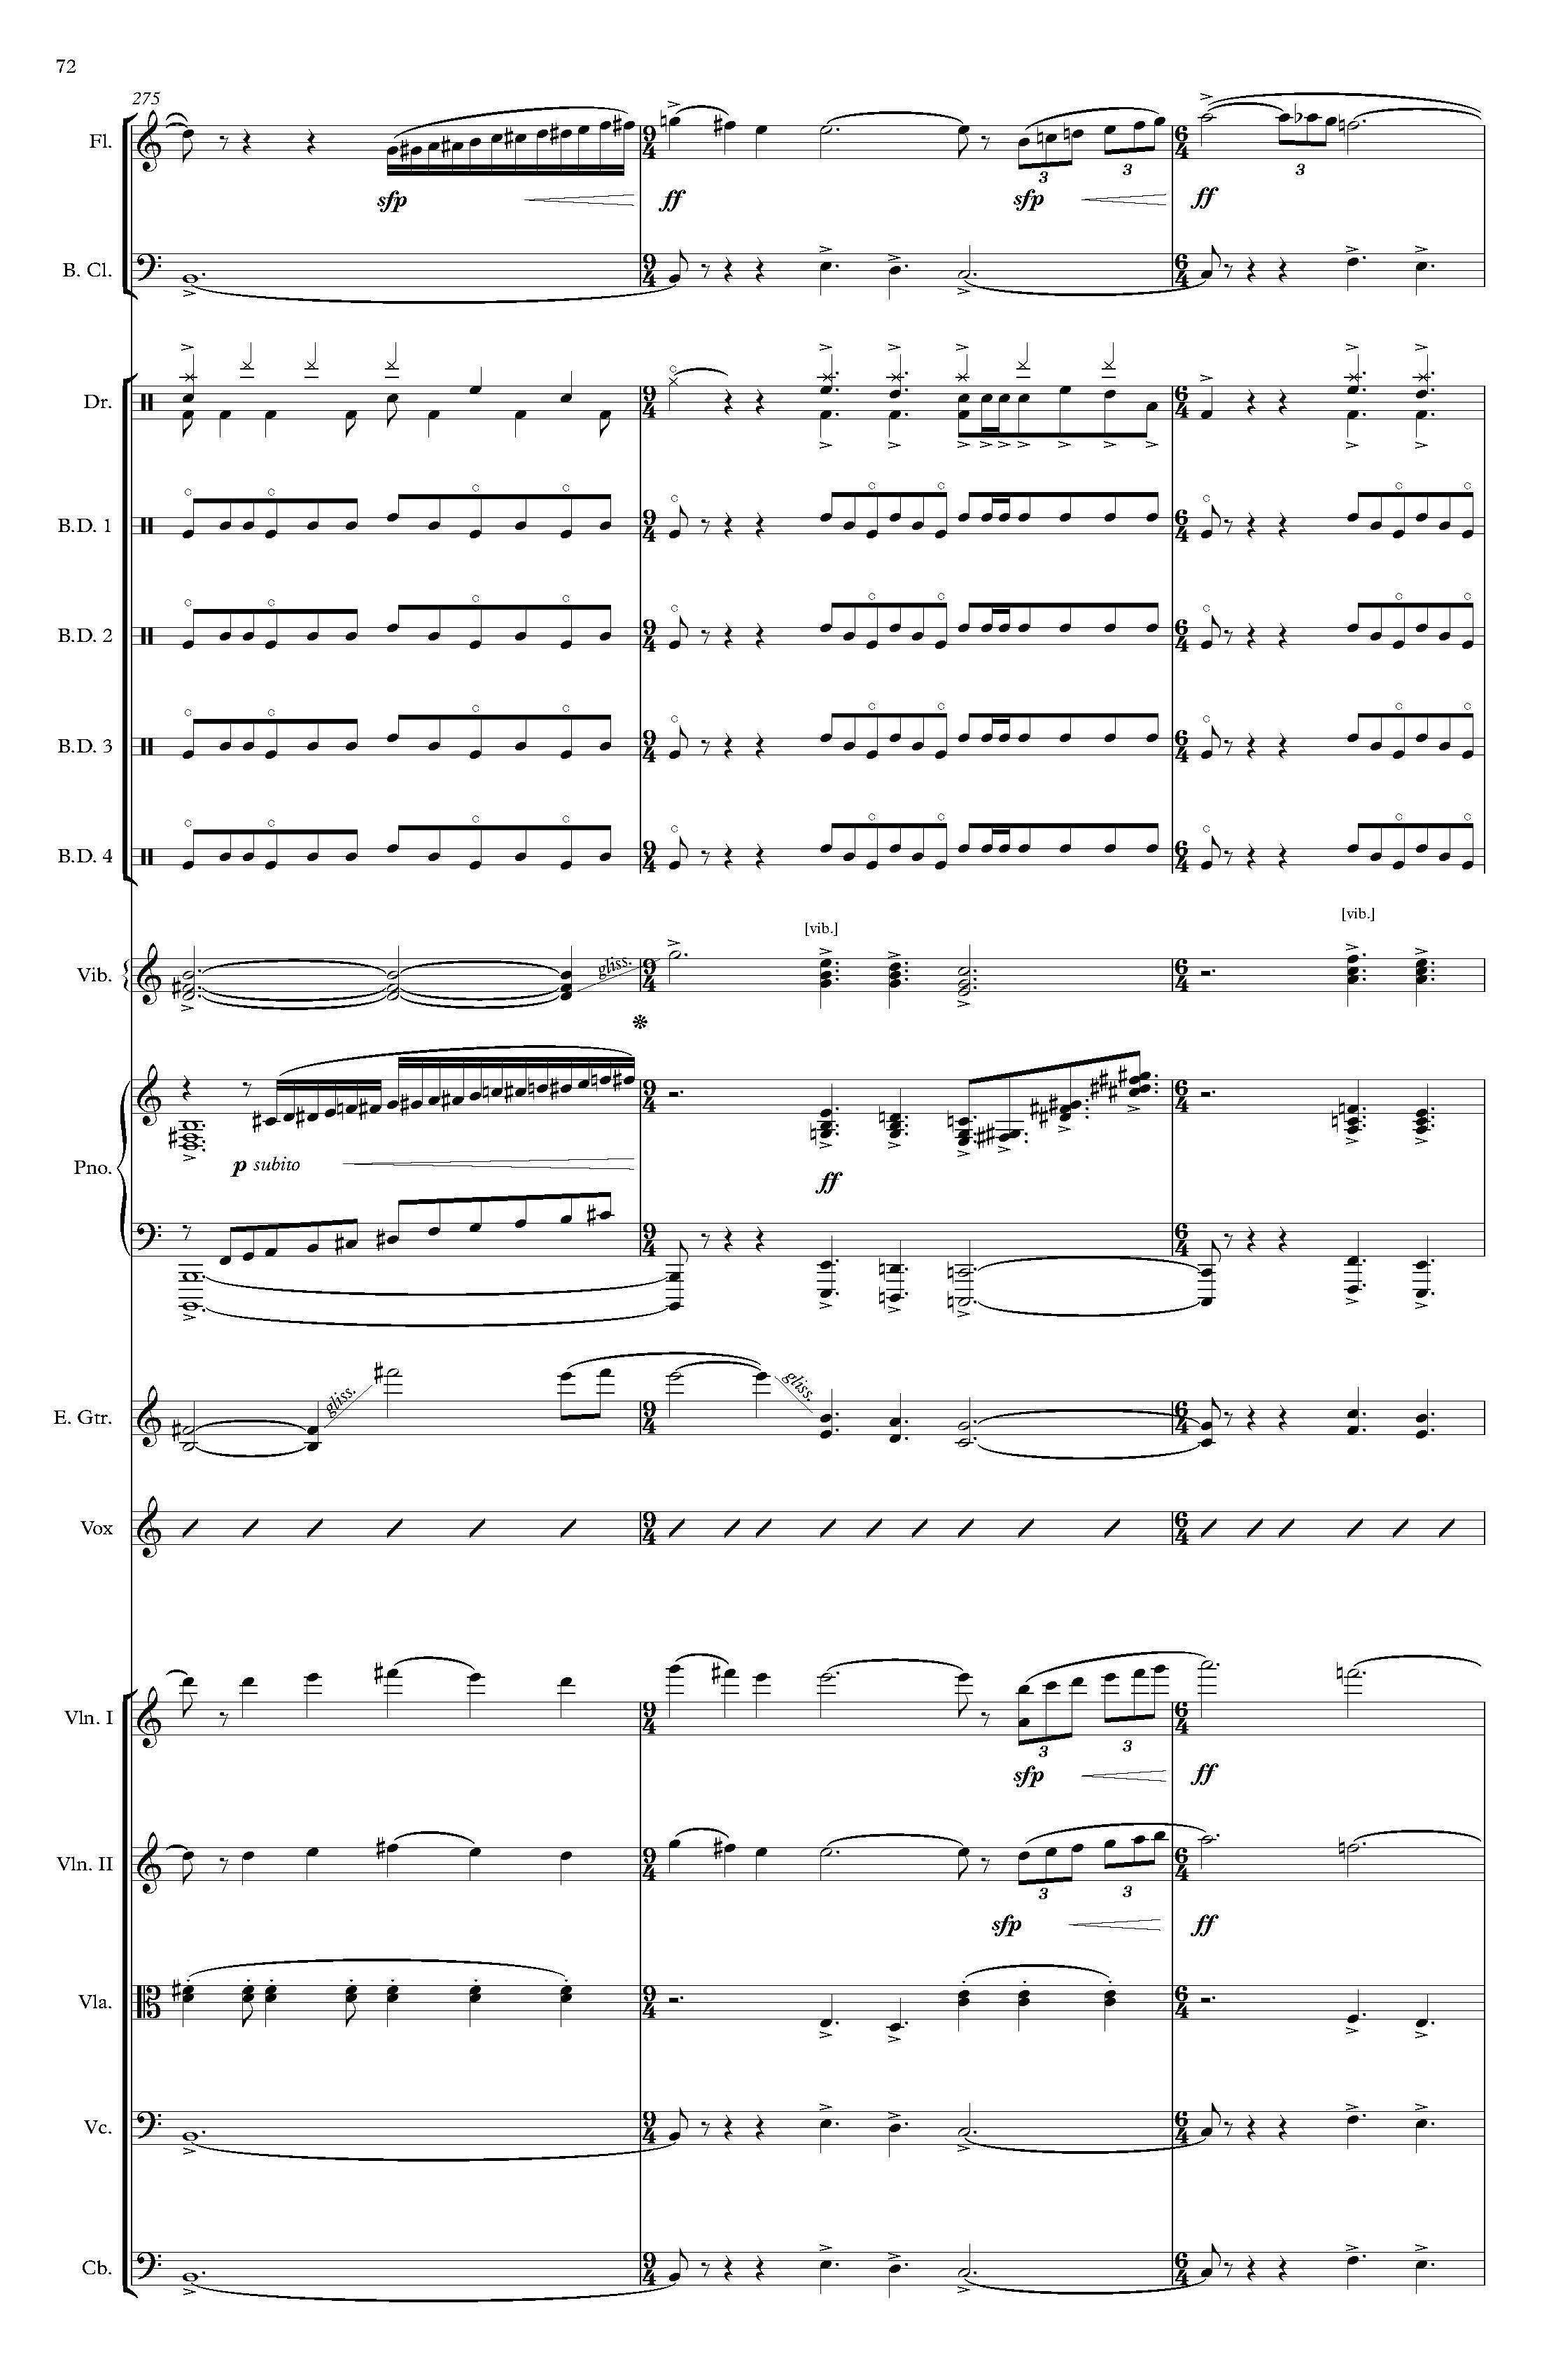 The Rembrandt of Avenue A - Complete Score_Page_78.jpg